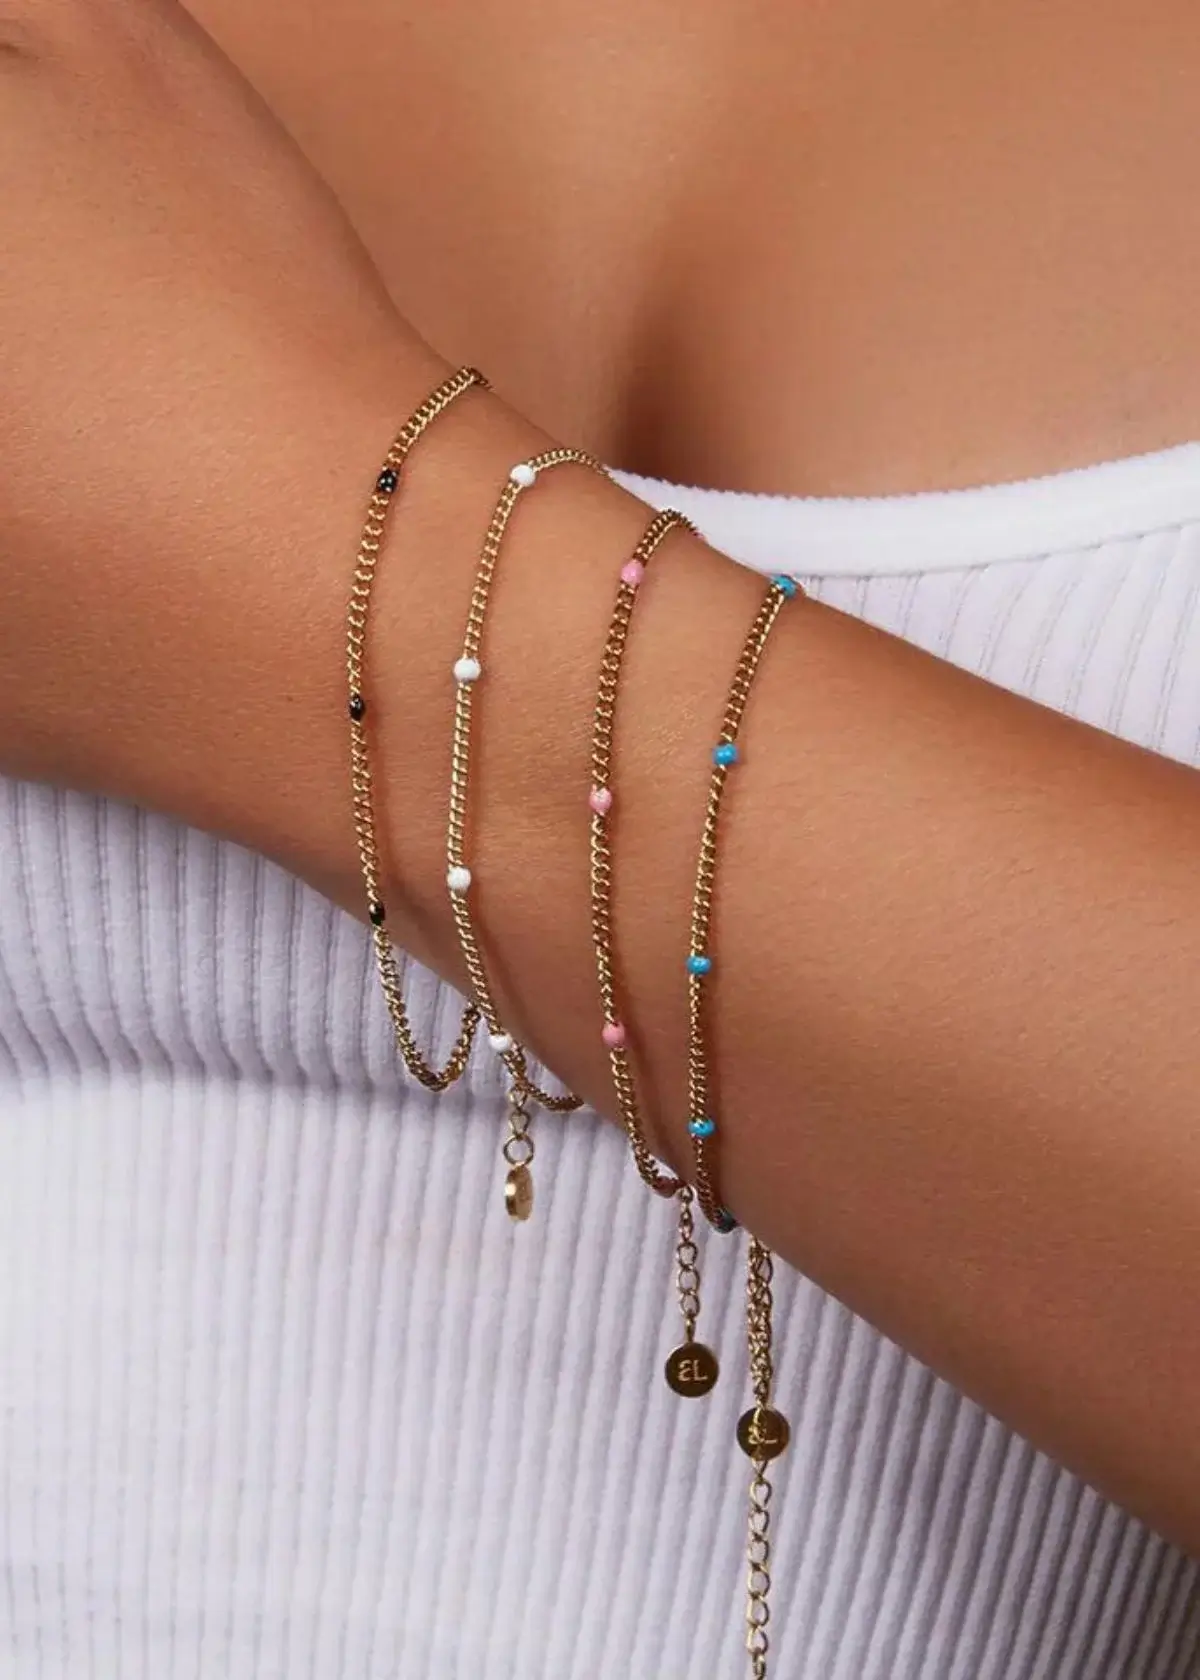 How to choose the right layering bracelets?